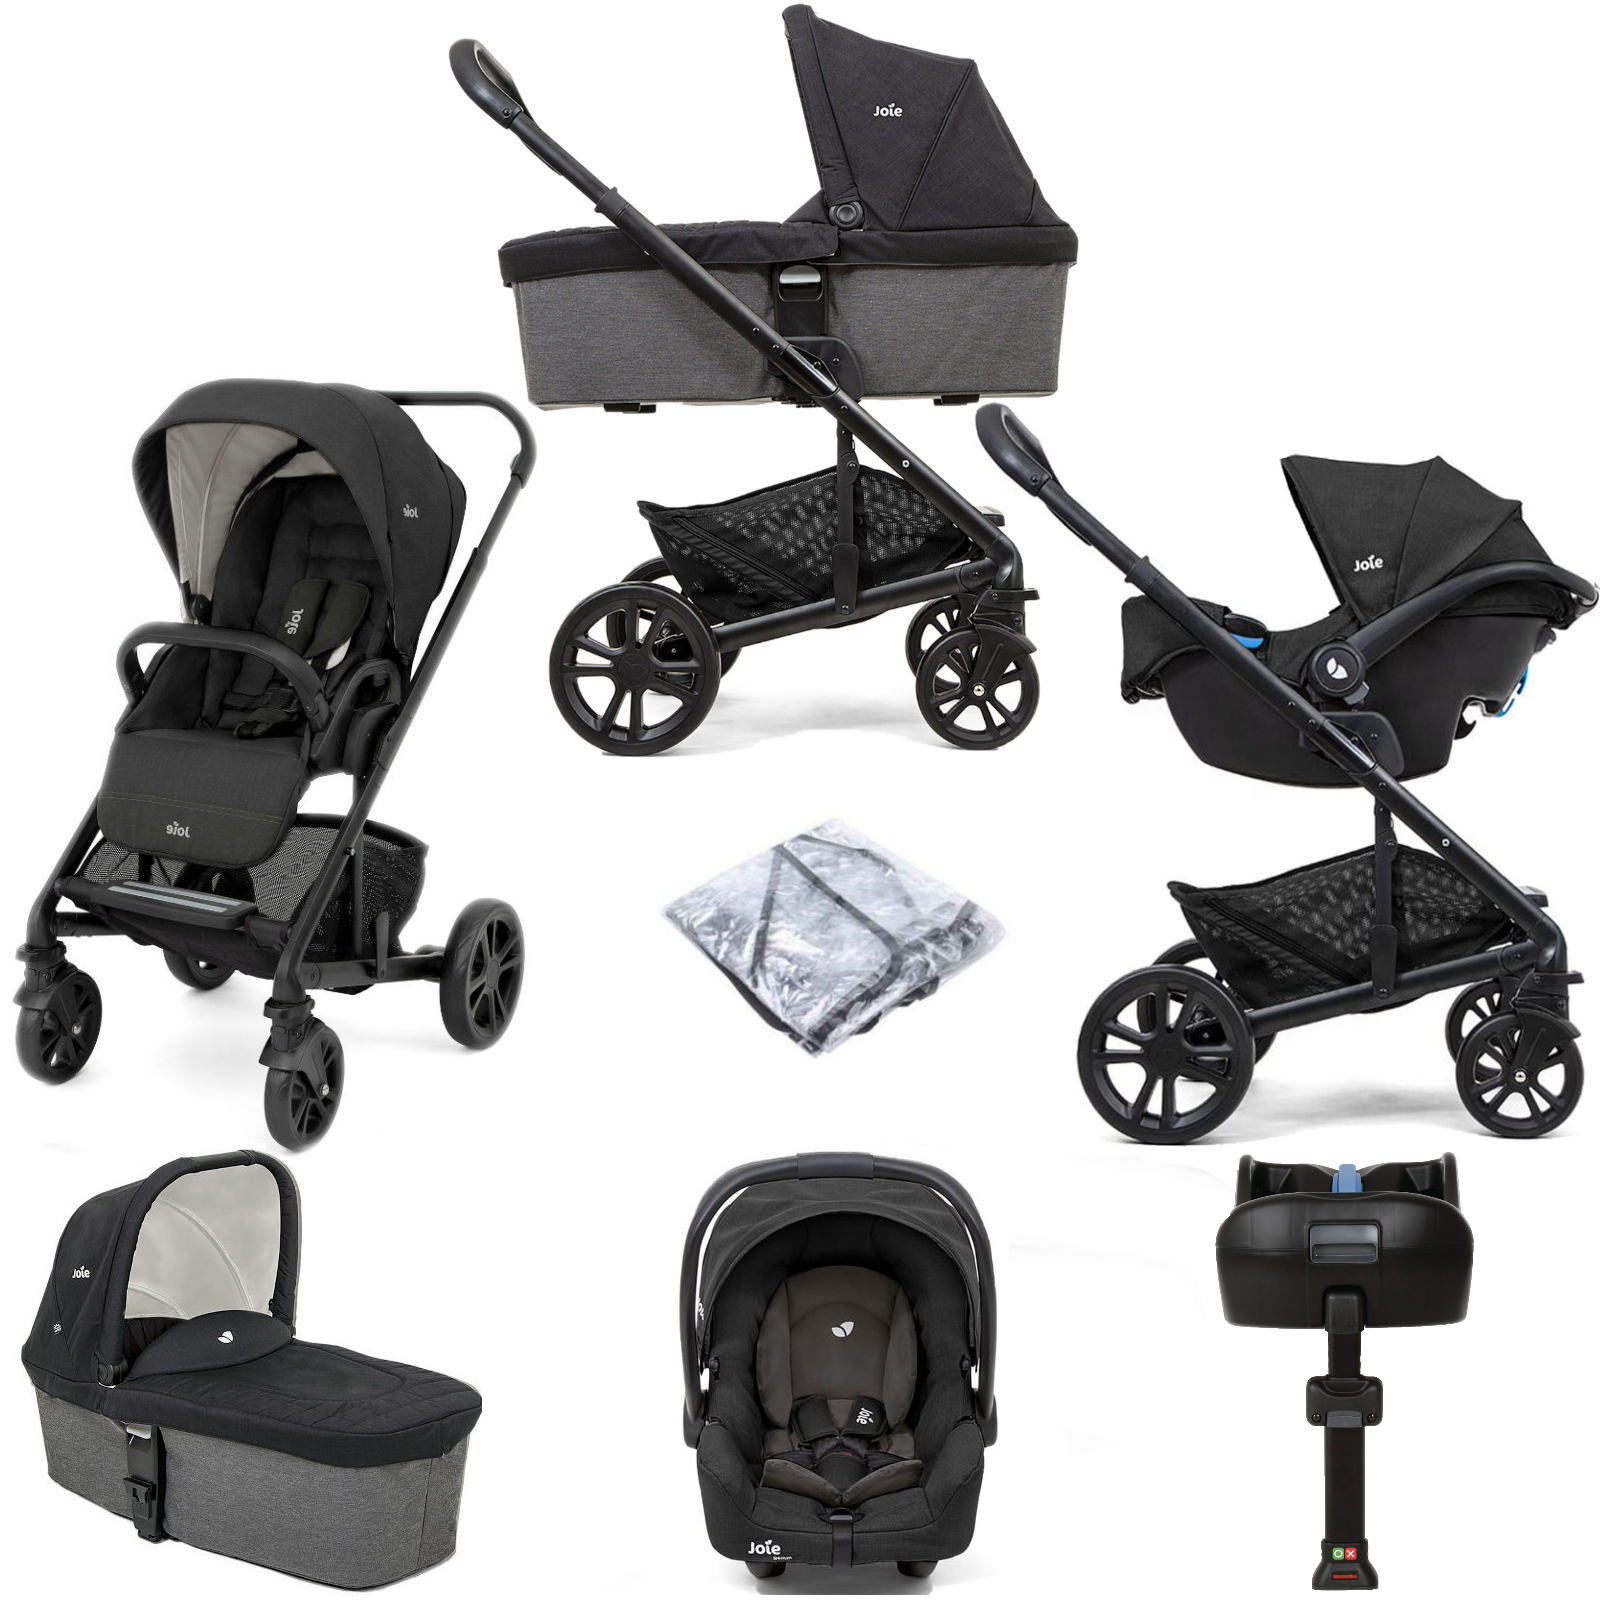 Joie Chrome (Gemm) Travel System with Carrycot & ISOFIX Base - Shale